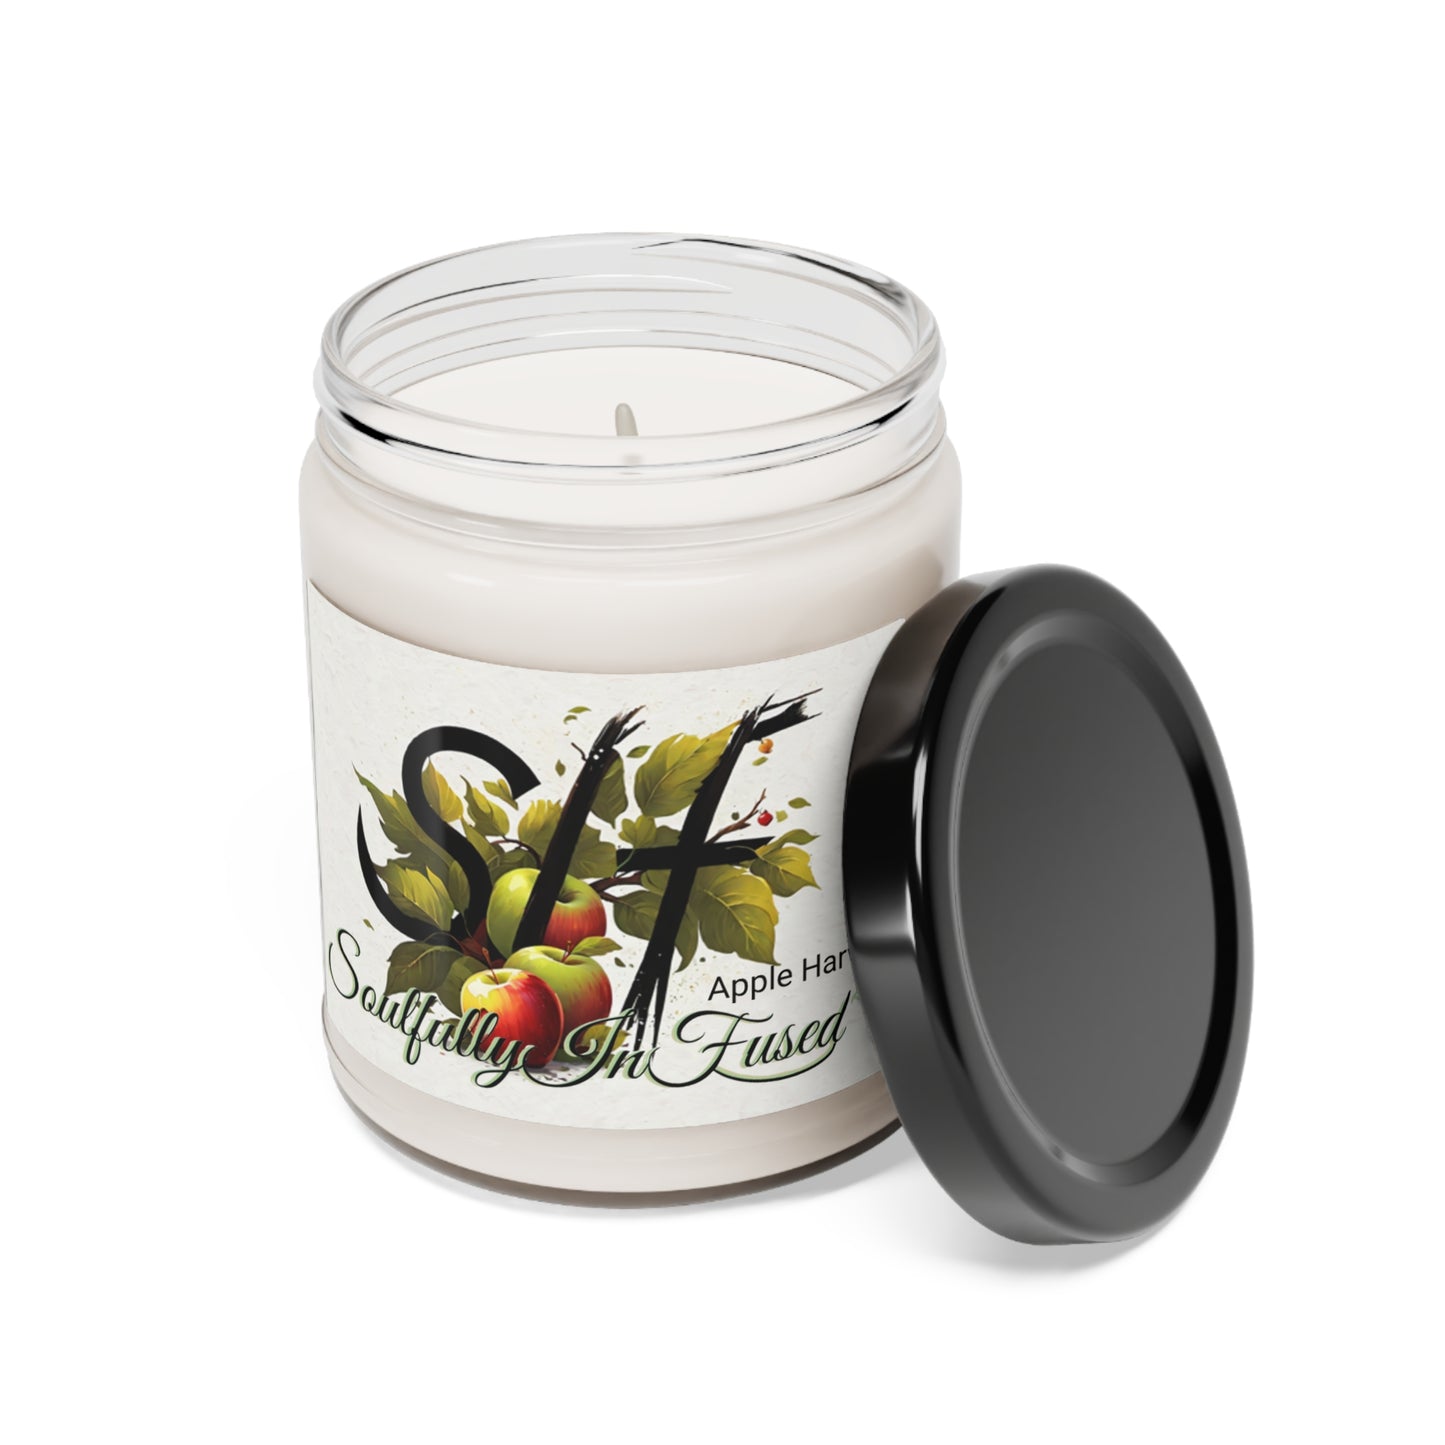 Sif's Scented Soy Candle, 9oz